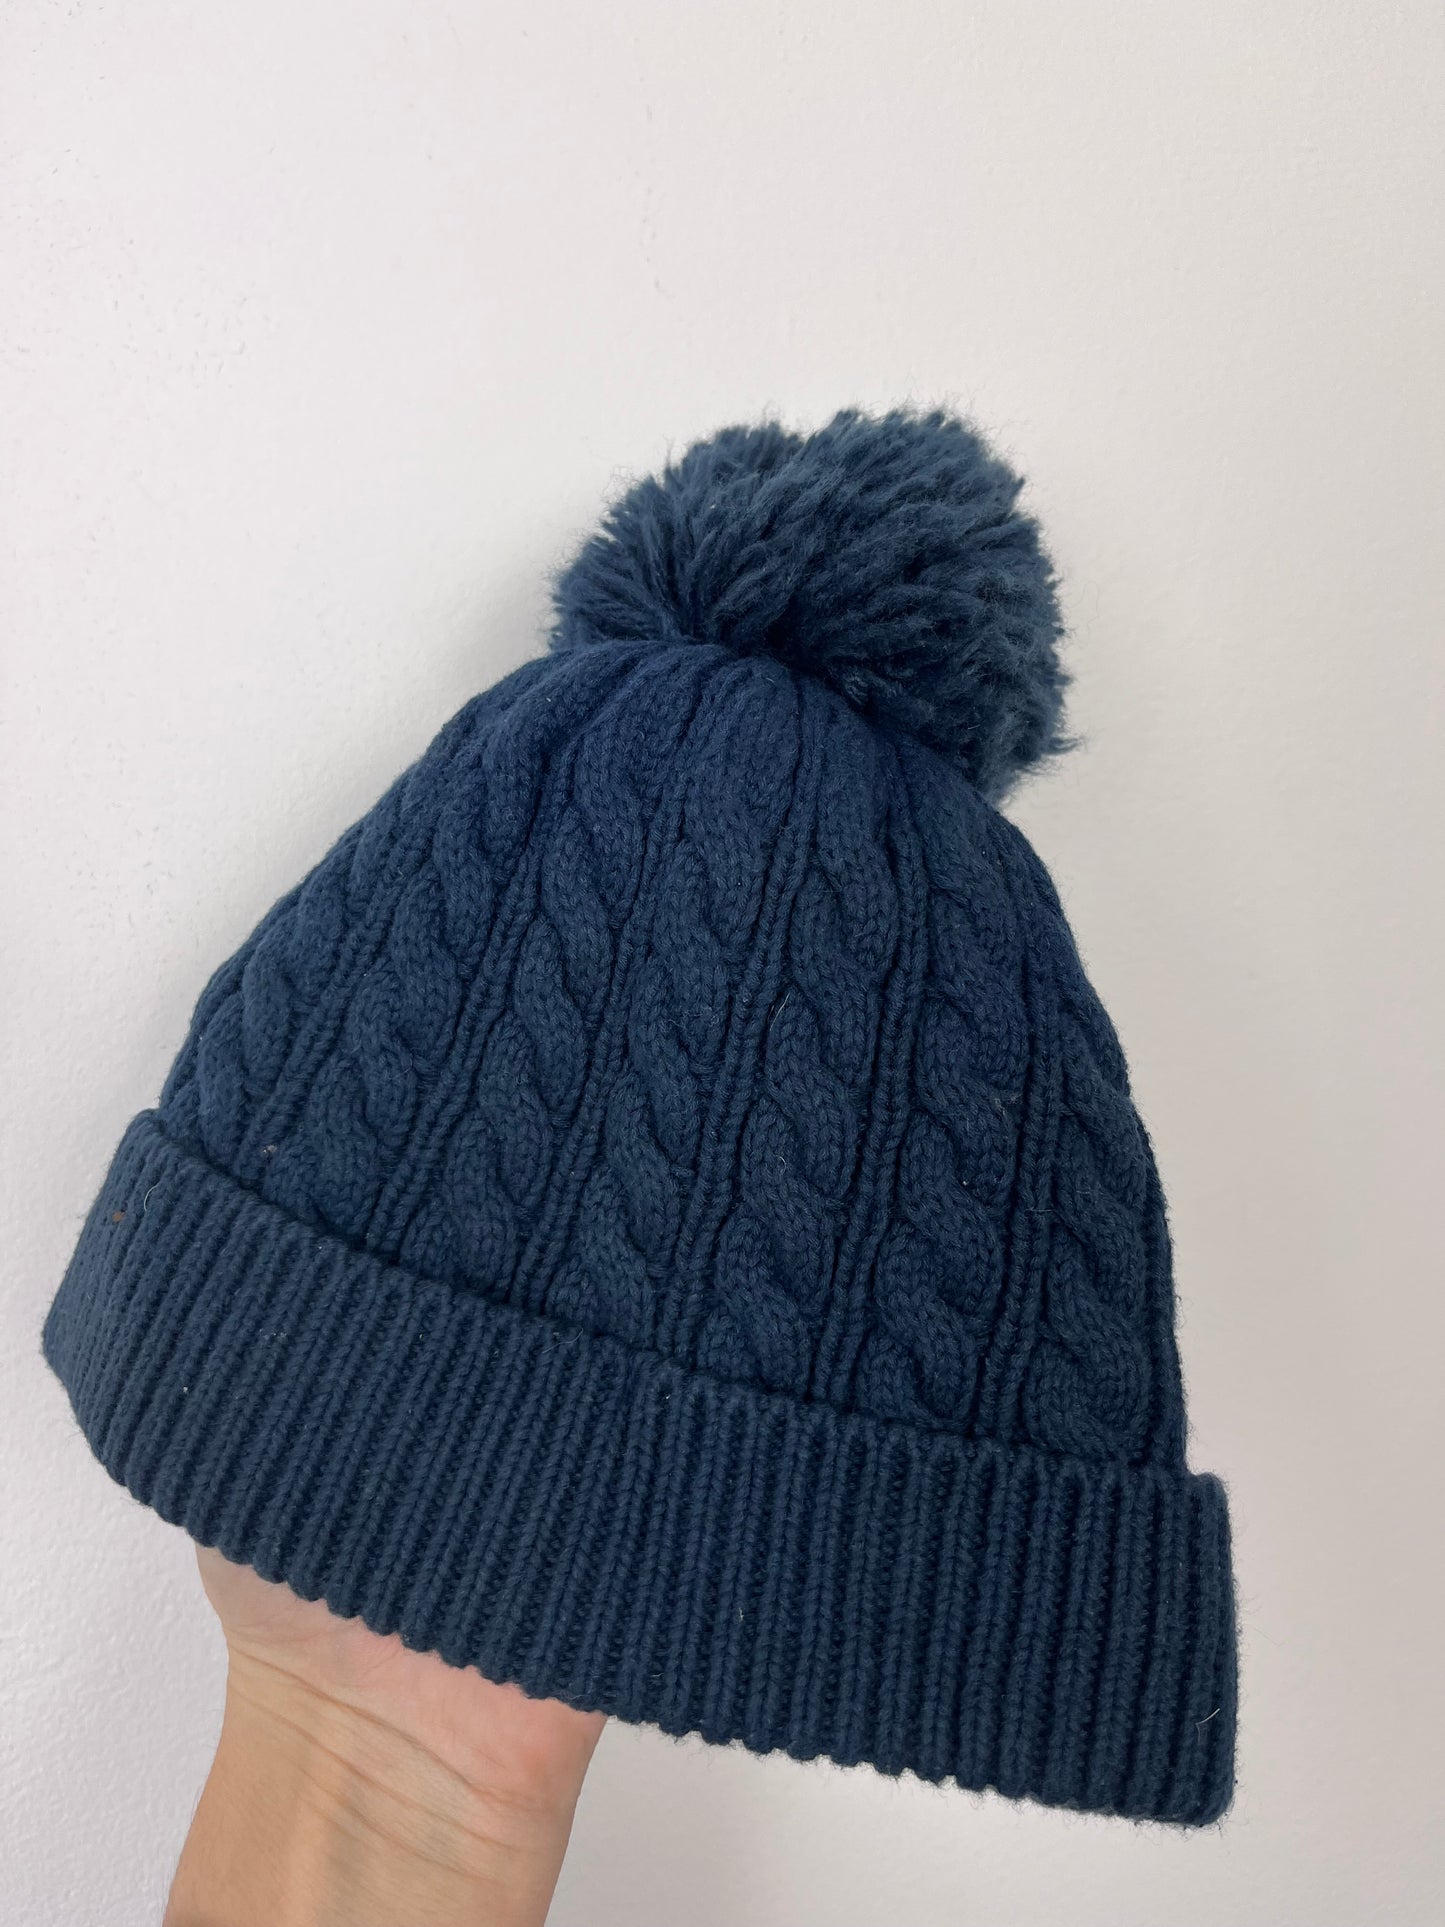 Next 18-24 Months-Hats-Second Snuggle Preloved